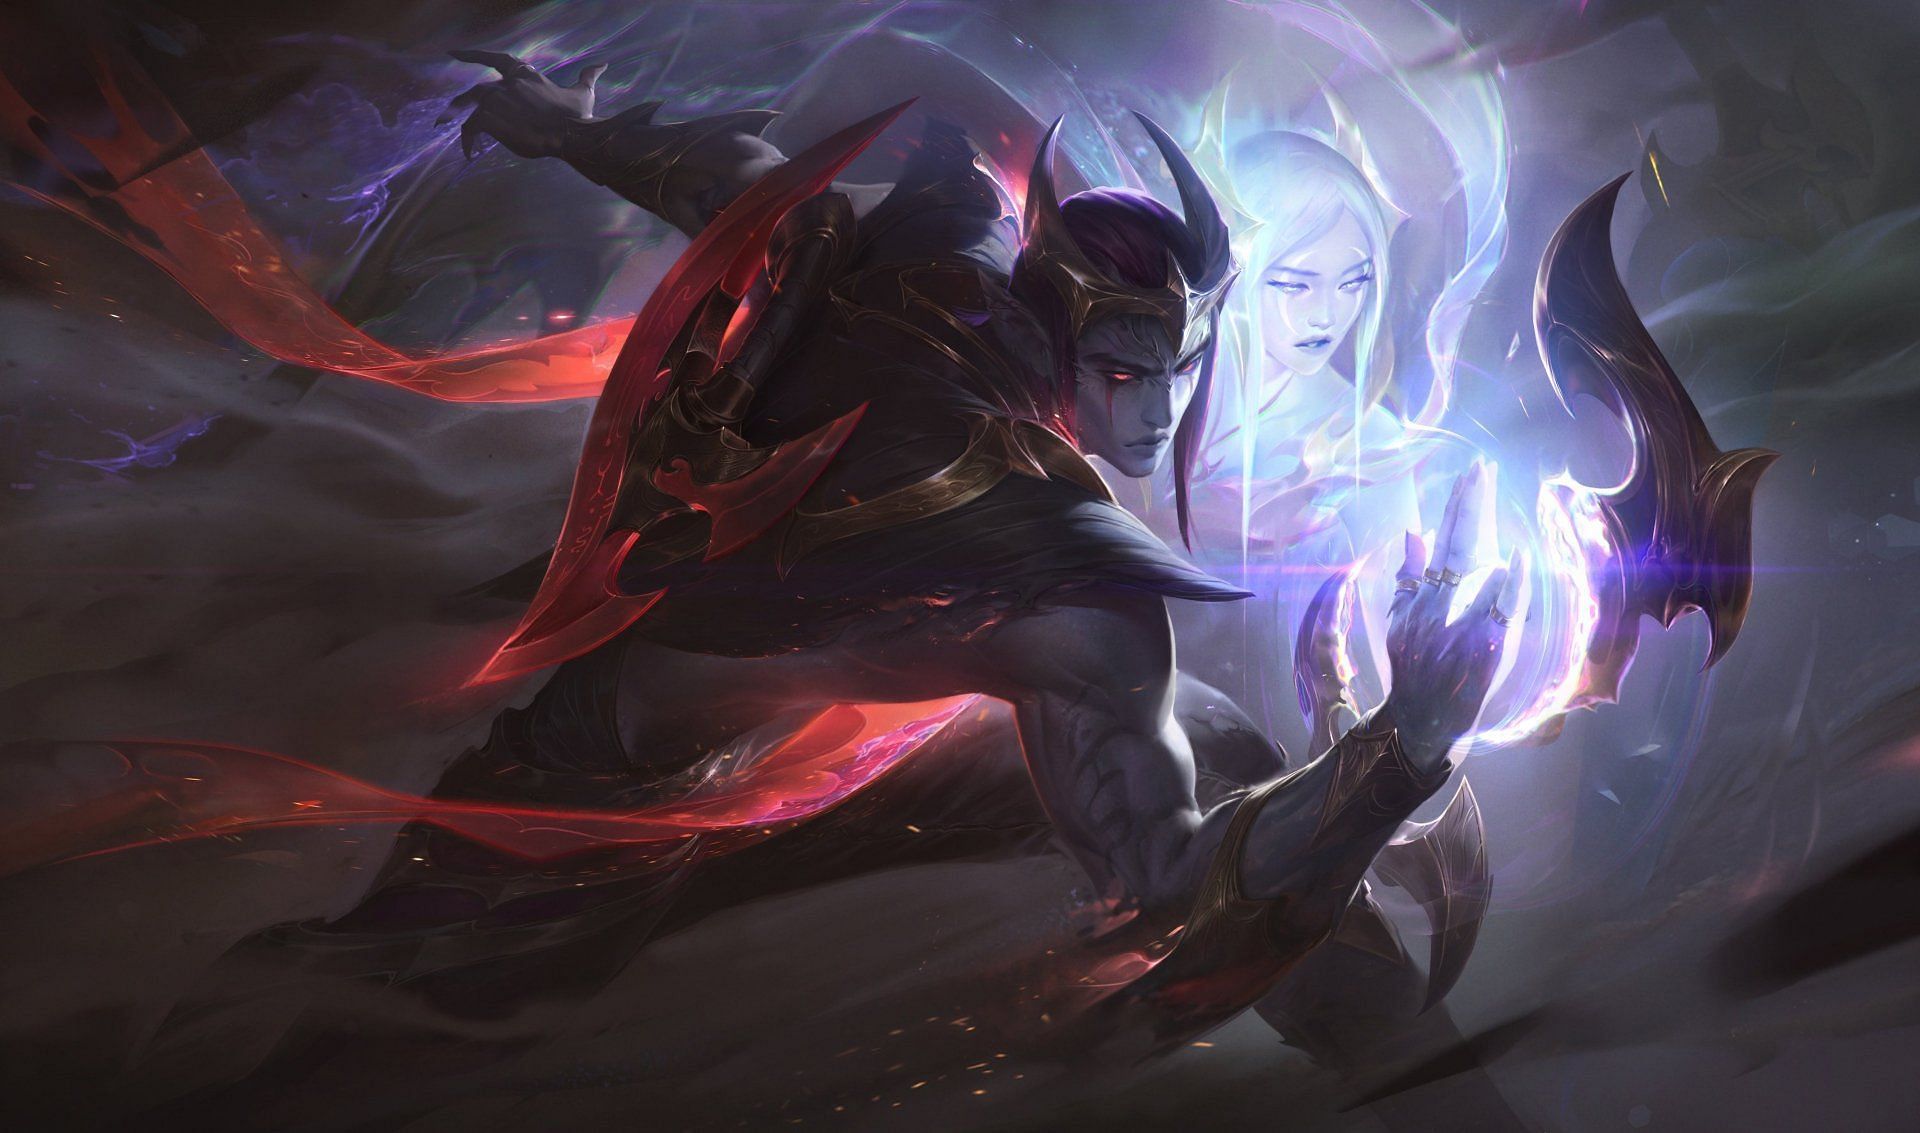 Aphelios gained popularity after receiving buffs through the course of the year (Image via League of Legends)